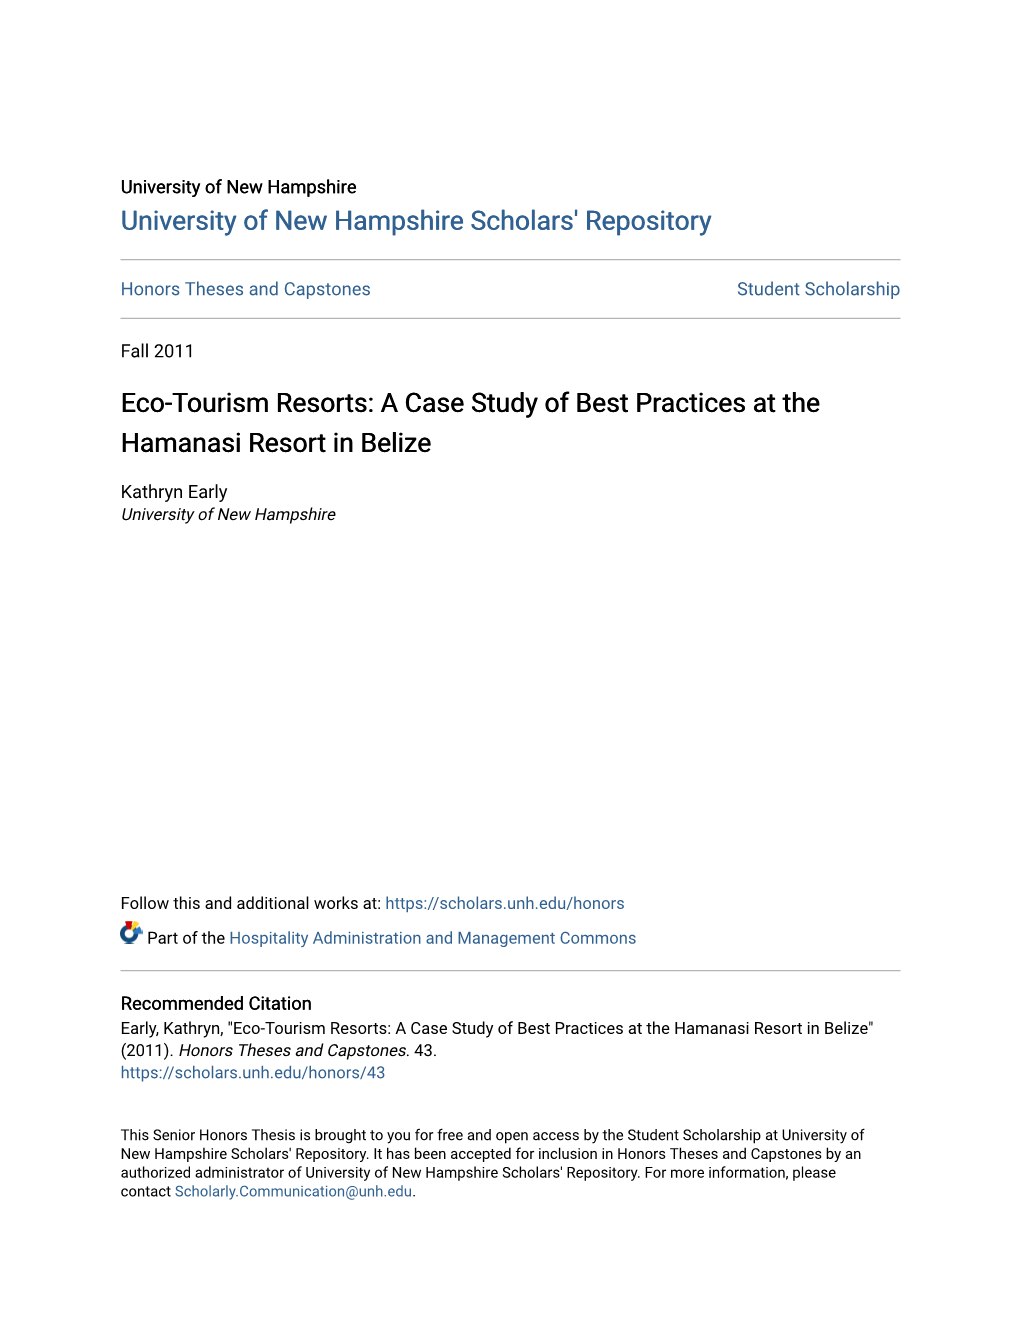 Eco-Tourism Resorts: a Case Study of Best Practices at the Hamanasi Resort in Belize